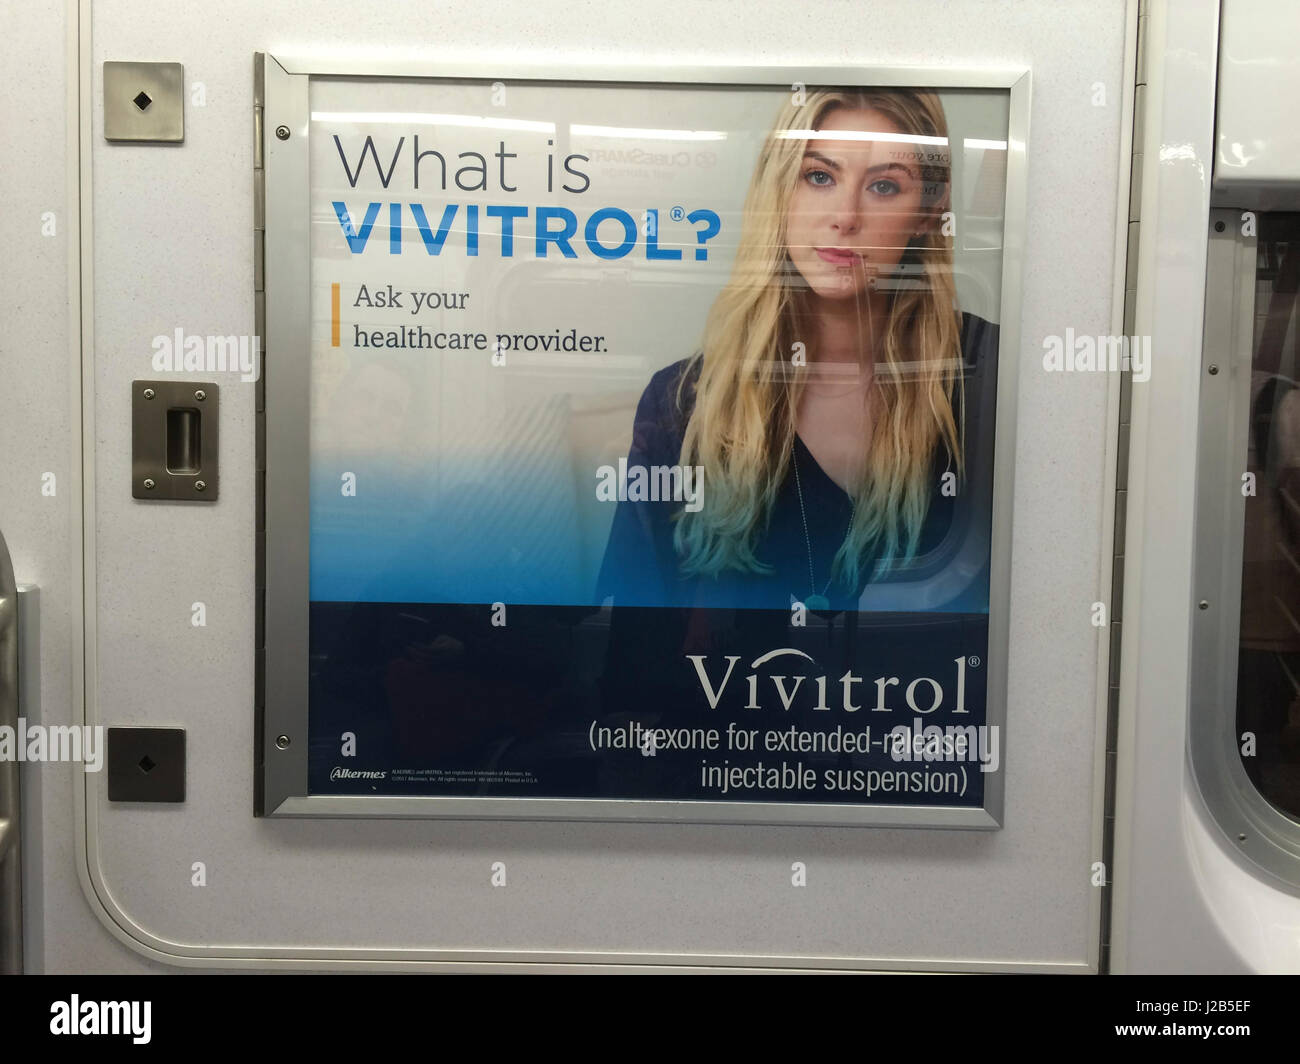 An advertisement for the drug Vivitrol (naltrexone) in a subway car in New York on Friday, April 21, 2017. Vivitrol blocks the effects of narcotic abuse stopping the pain relief and the euphoria associated with being high. The U.S. is encountering an opioid abuse pandemic and Vivitrol is one of the drugs used to combat addiction. (© Frances M. Roberts) Stock Photo